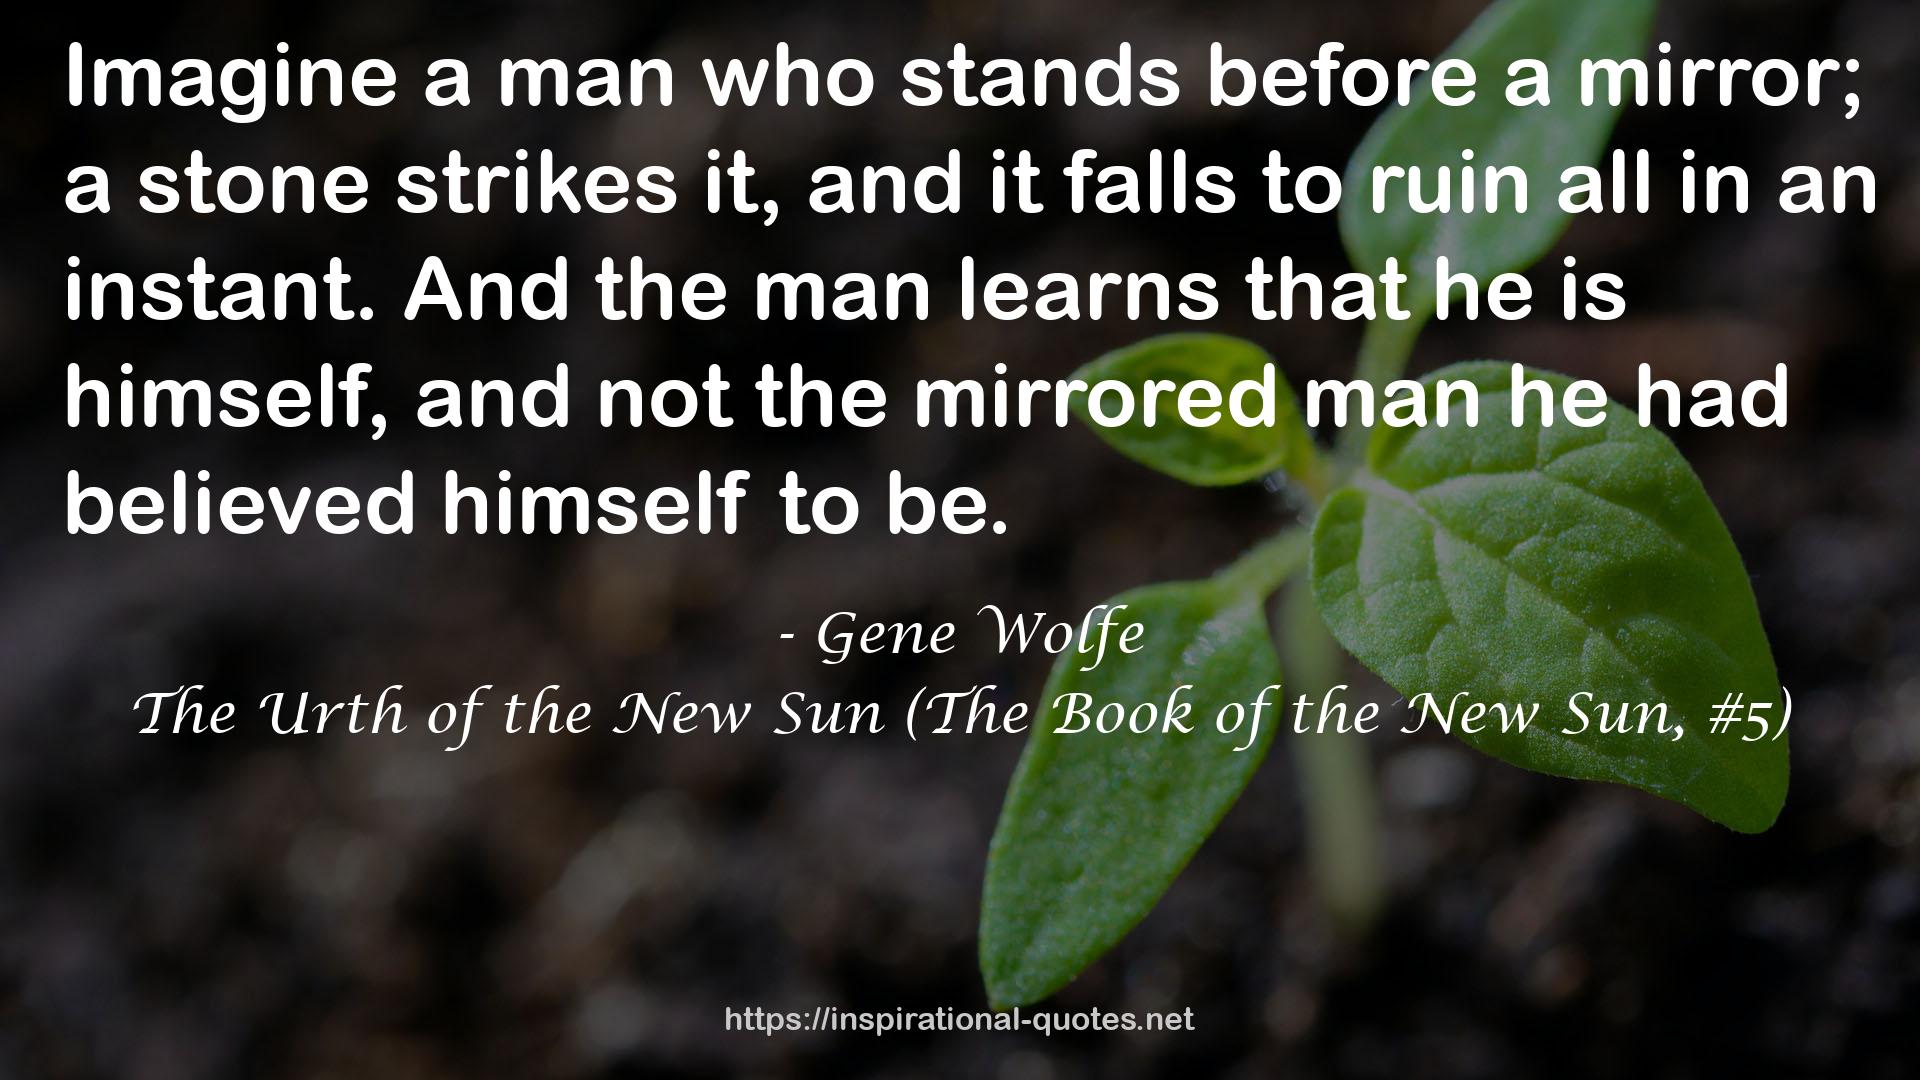 The Urth of the New Sun (The Book of the New Sun, #5) QUOTES